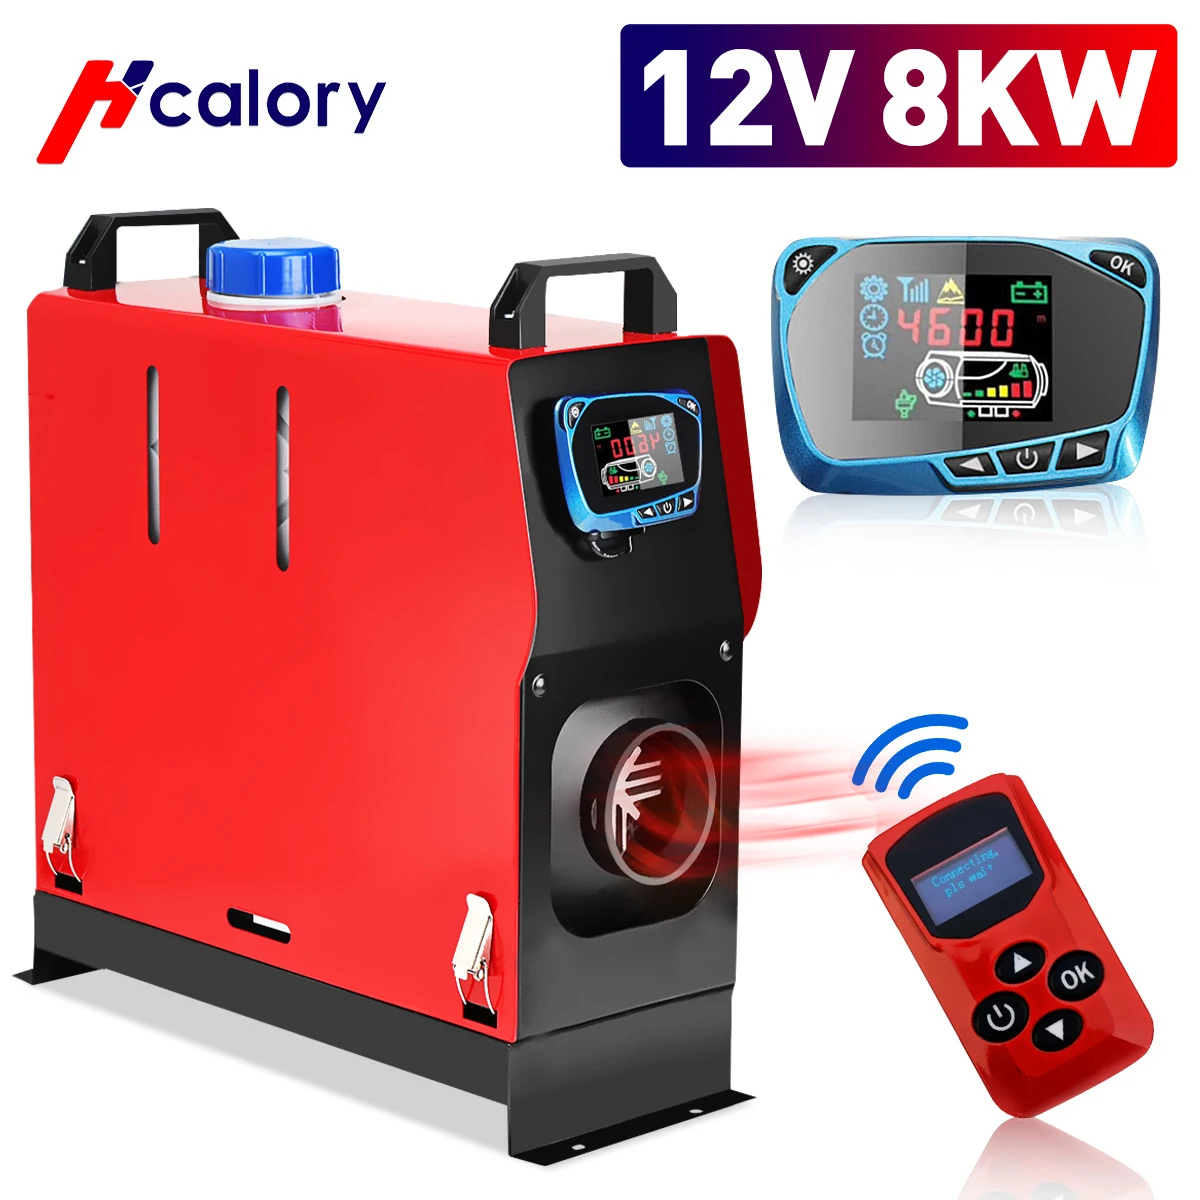 Hcalory 12V 5-8KW Diesel Air Heater Host Adjustable Blue LCD English Remote Control Integrated Parking Heater Machine For Car